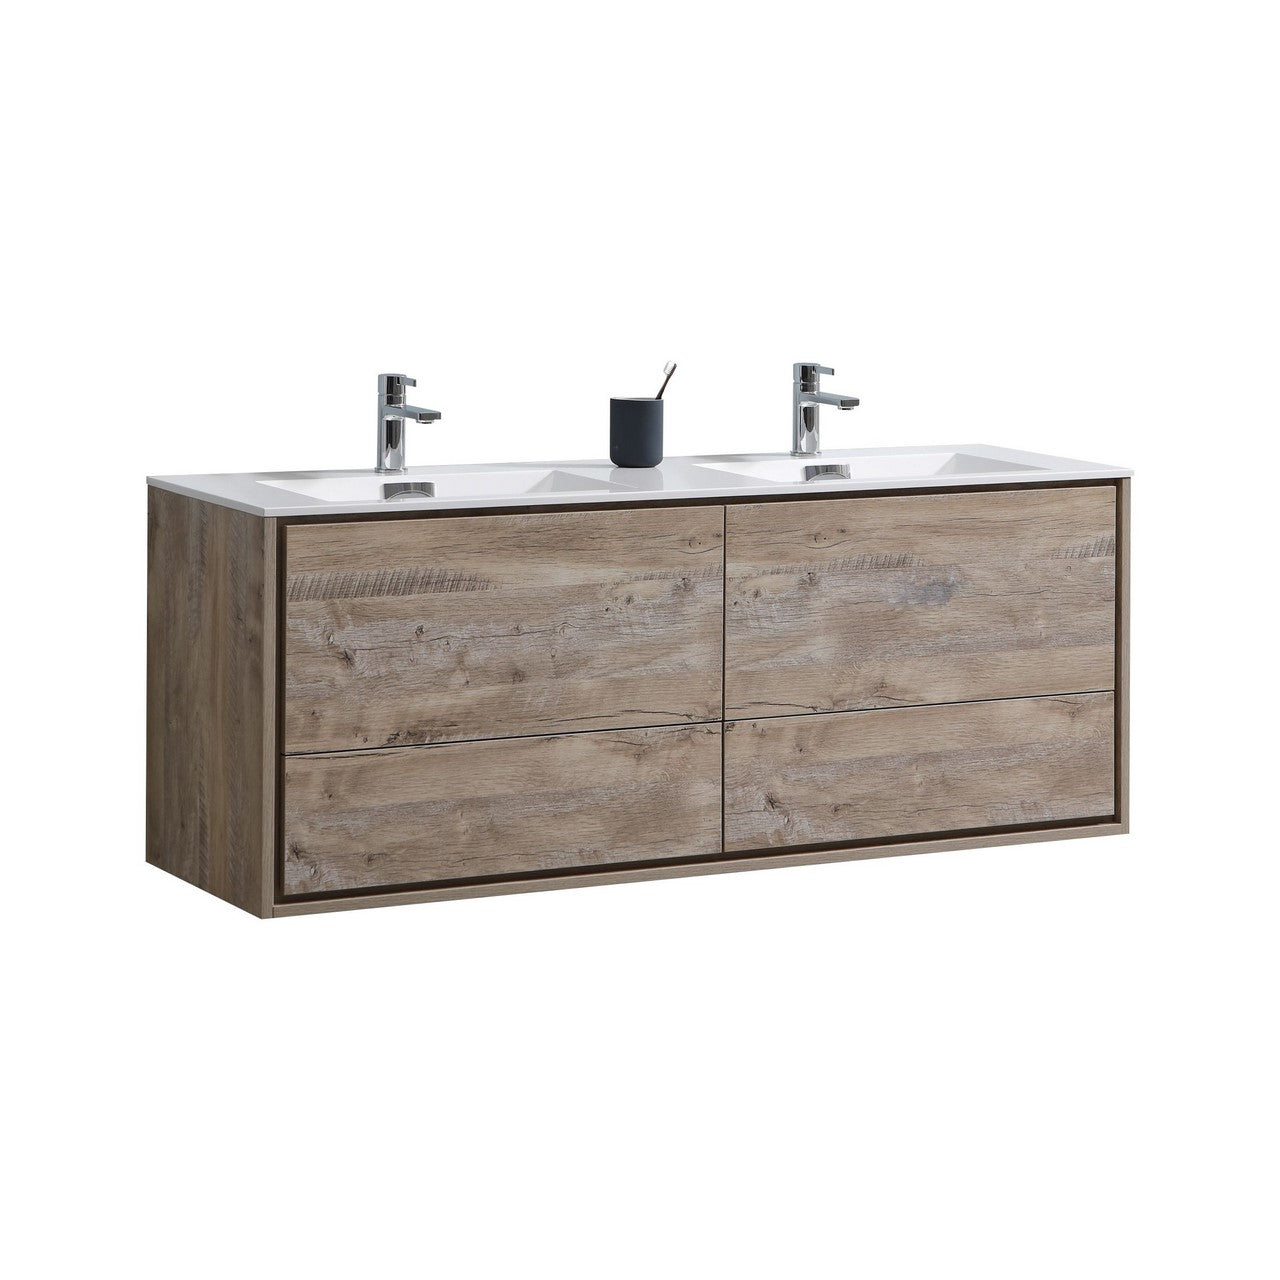 KUBEBATH De Lusso DL60D-NW 60" Double Wall Mount Bathroom Vanity in Nature Wood with White Acrylic Composite, Integrated Sinks, Angled View